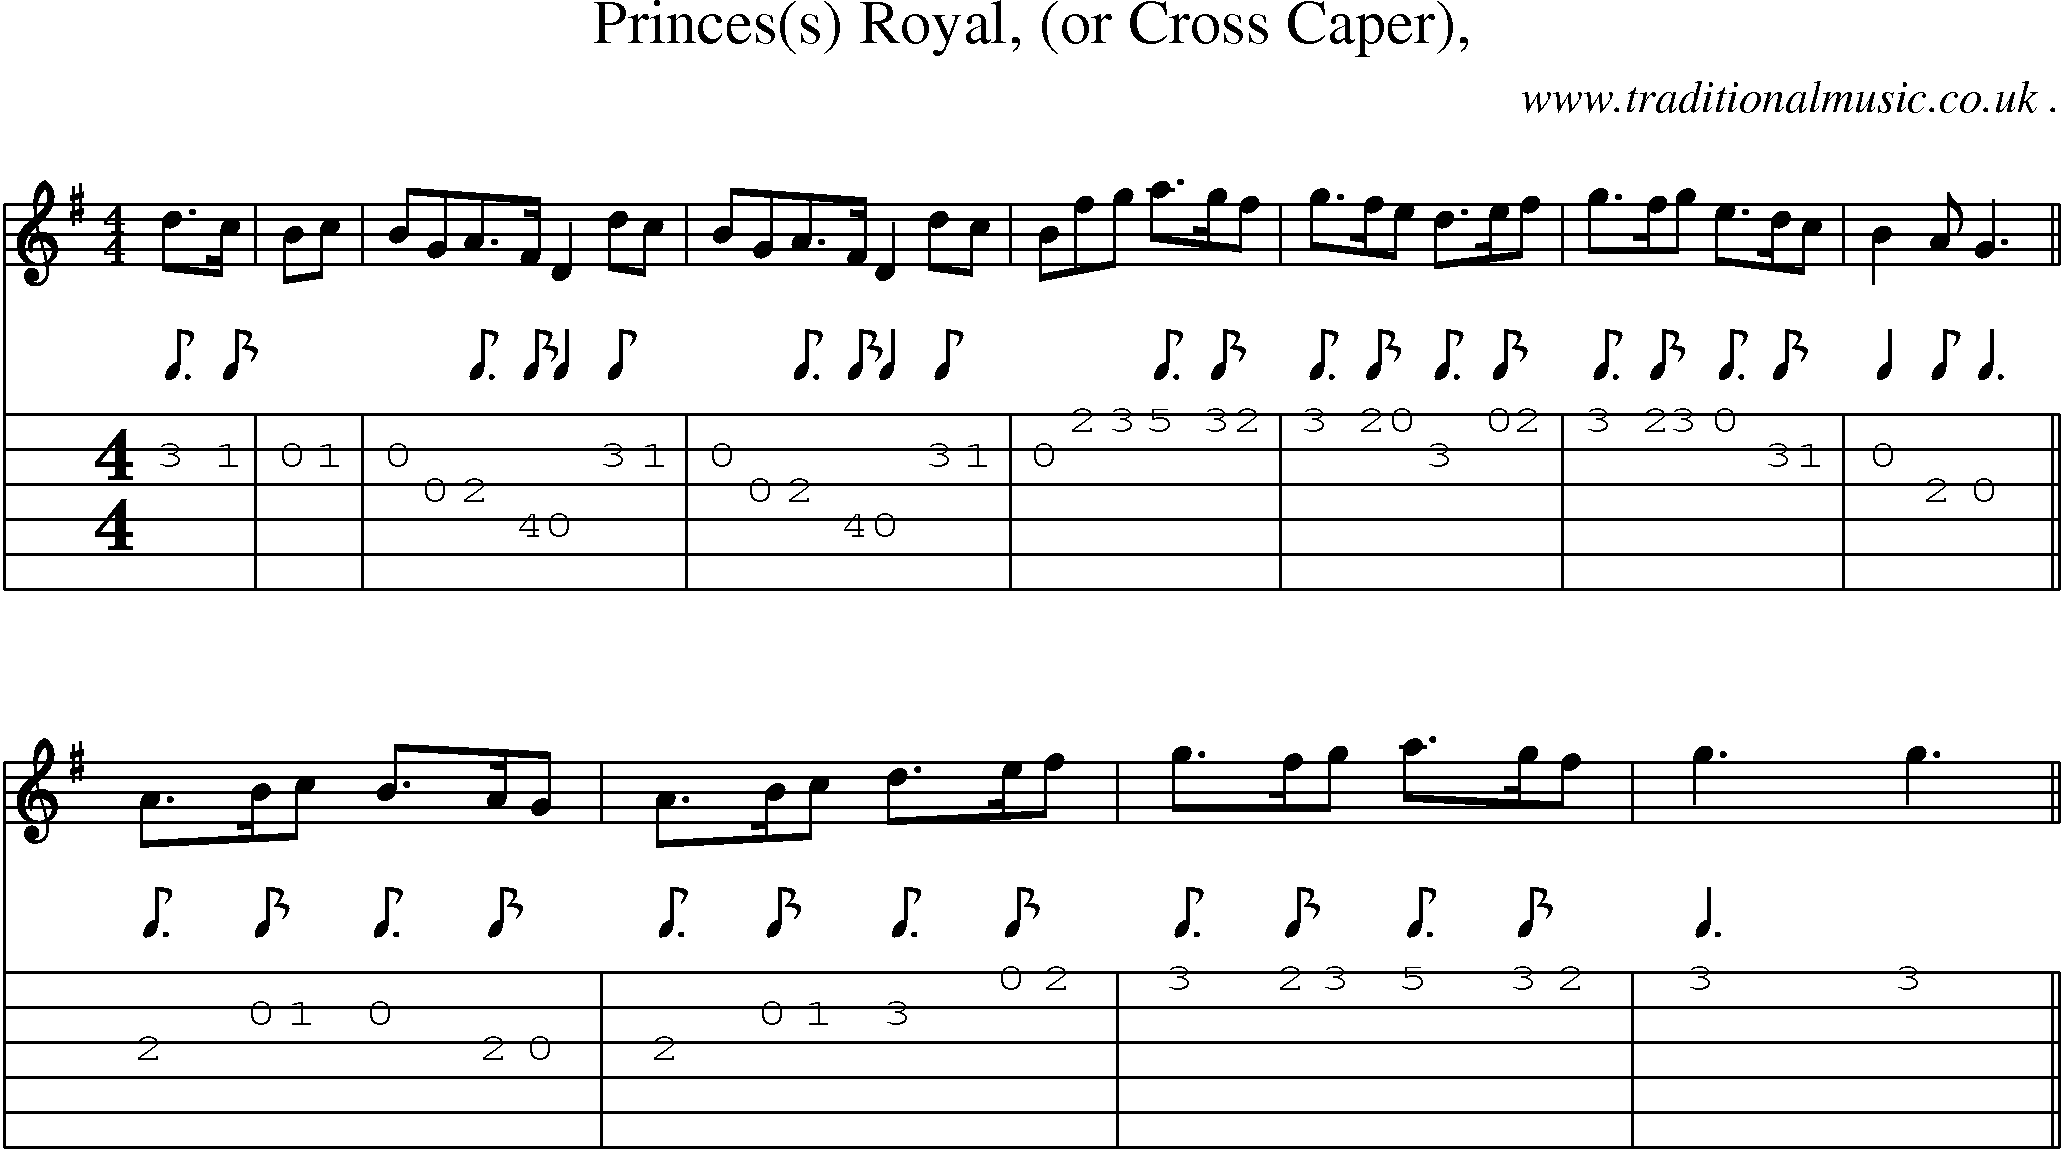 Sheet-Music and Guitar Tabs for Princes(s) Royal (or Cross Caper) 